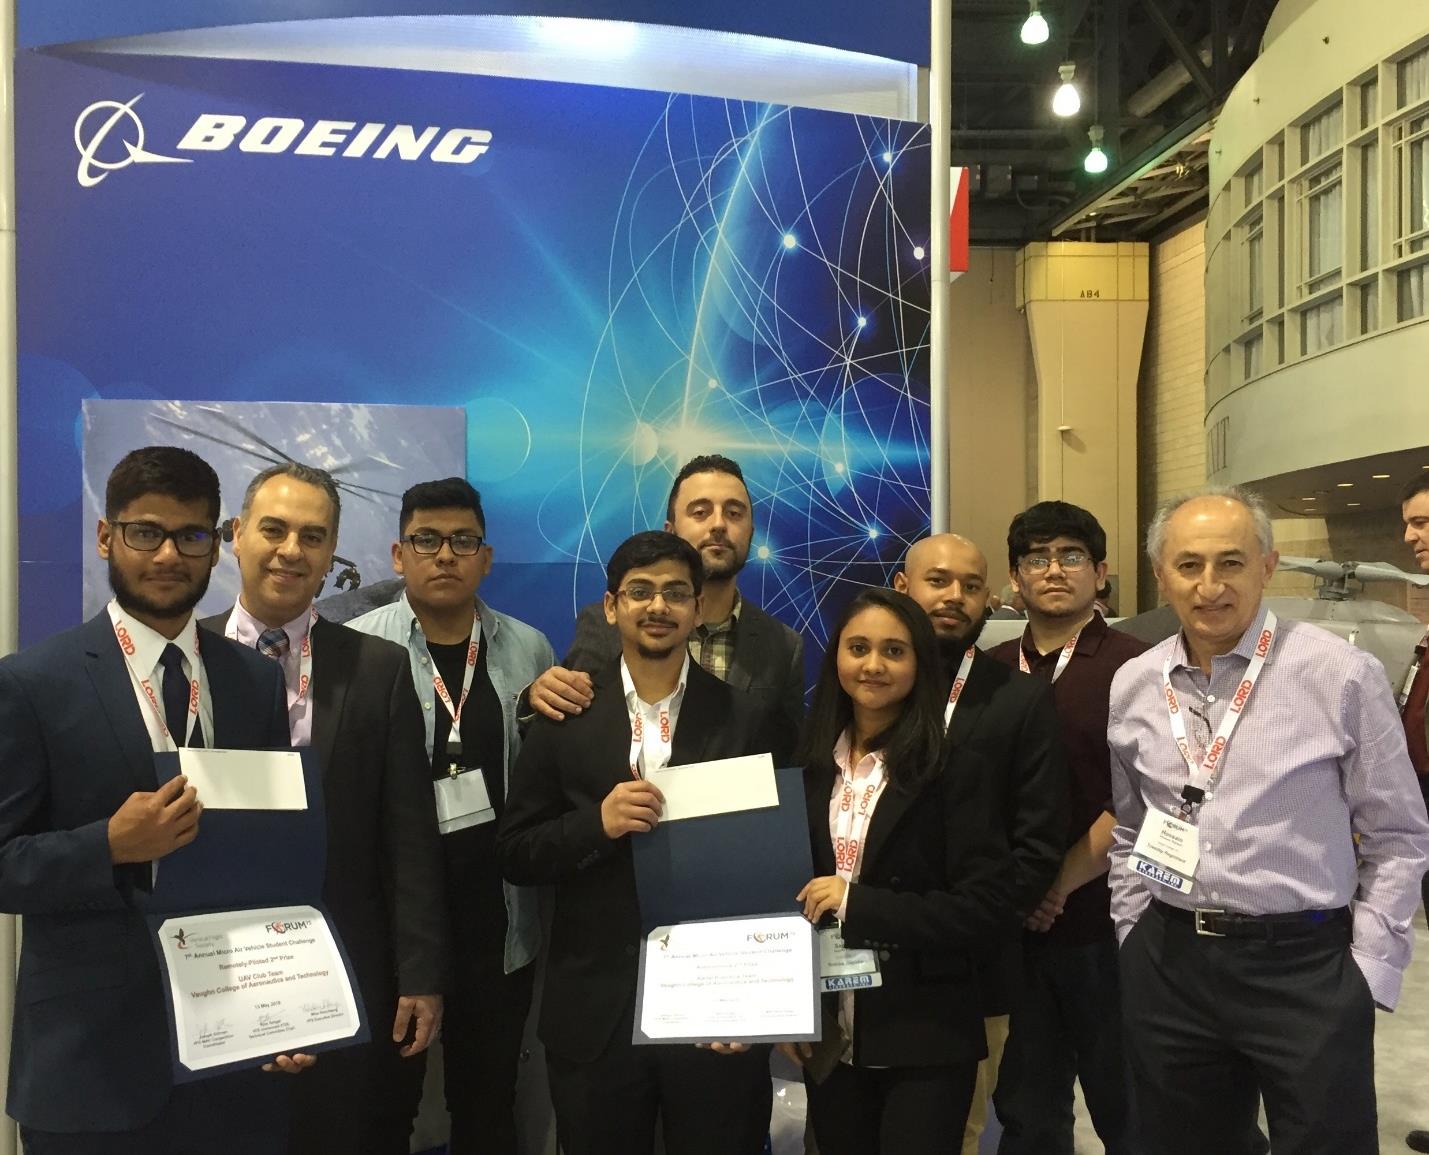 Vaughn’s Unmanned Aerial Vehicle Team Received the 2nd Place Award at the 2019 Micro Air Vehicle Student Challenge Competition